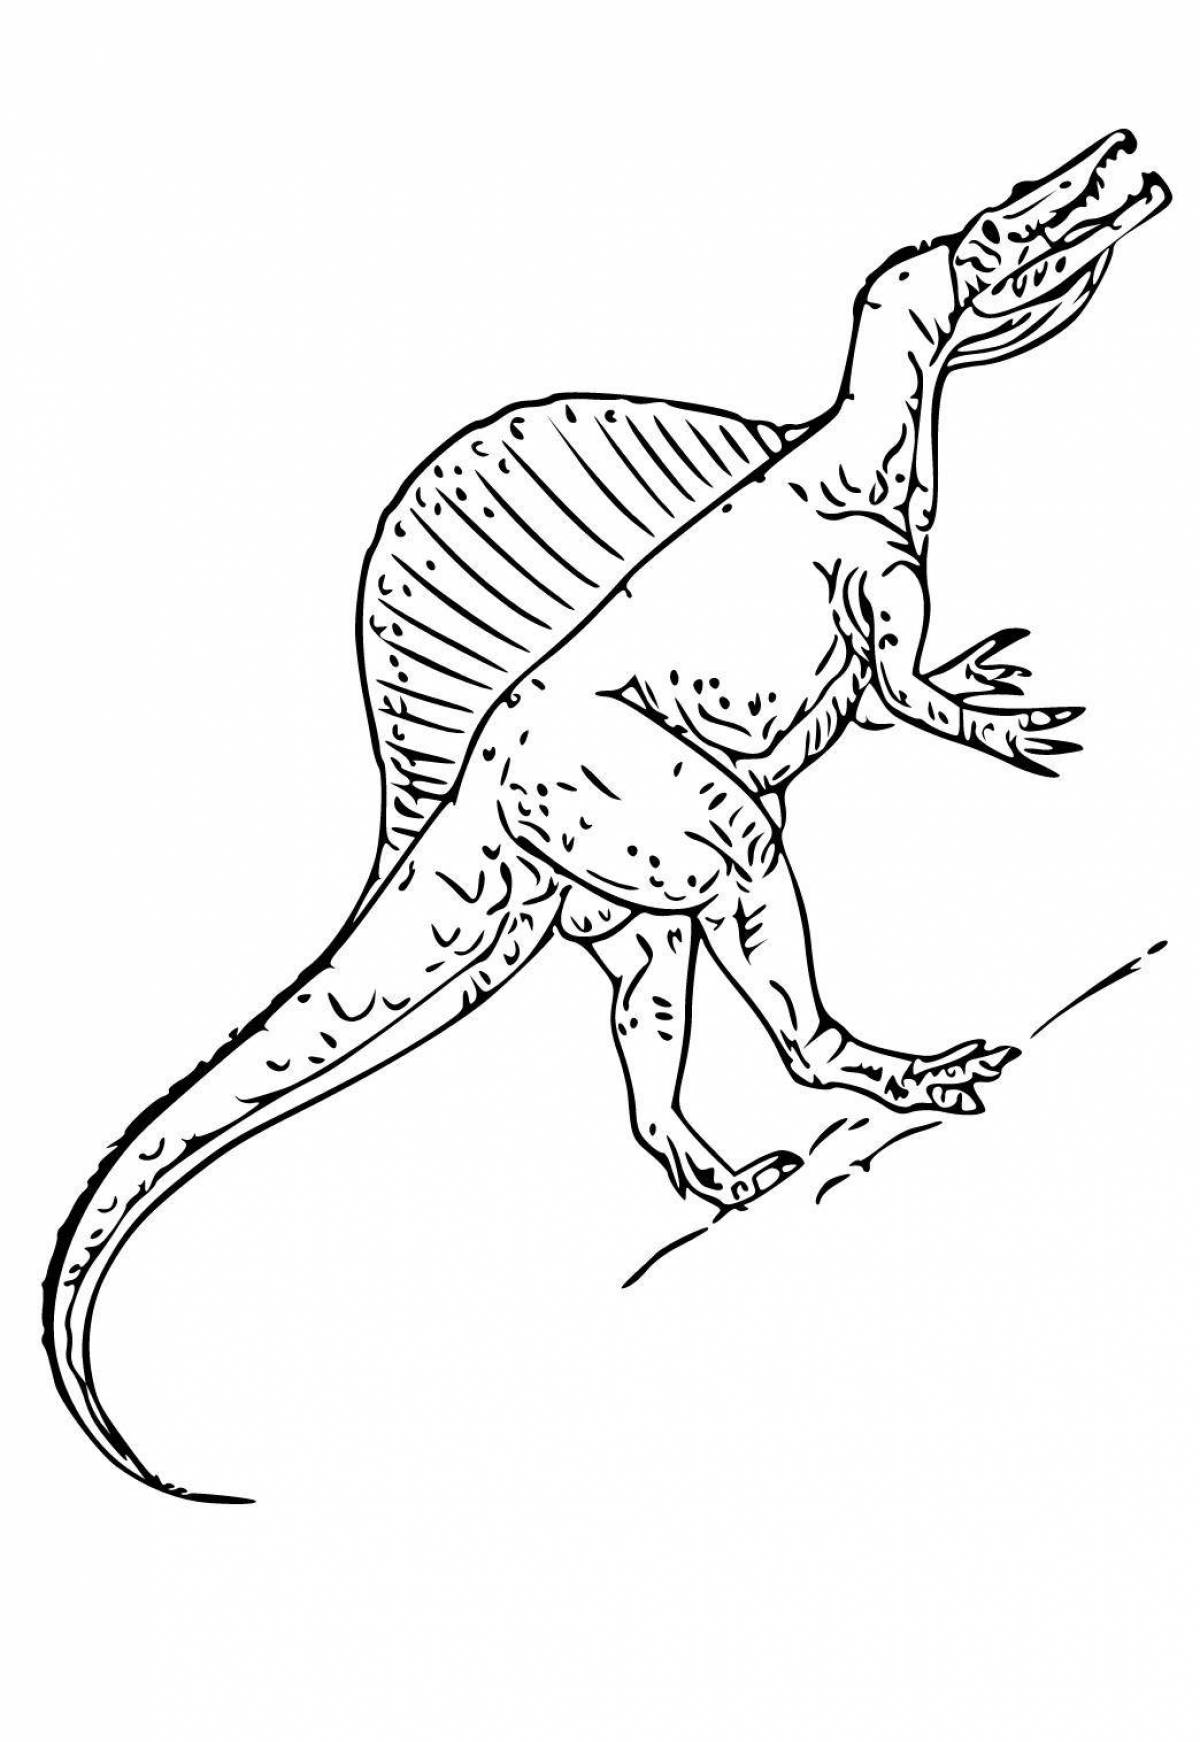 Outstanding spinosaurus coloring page for kids